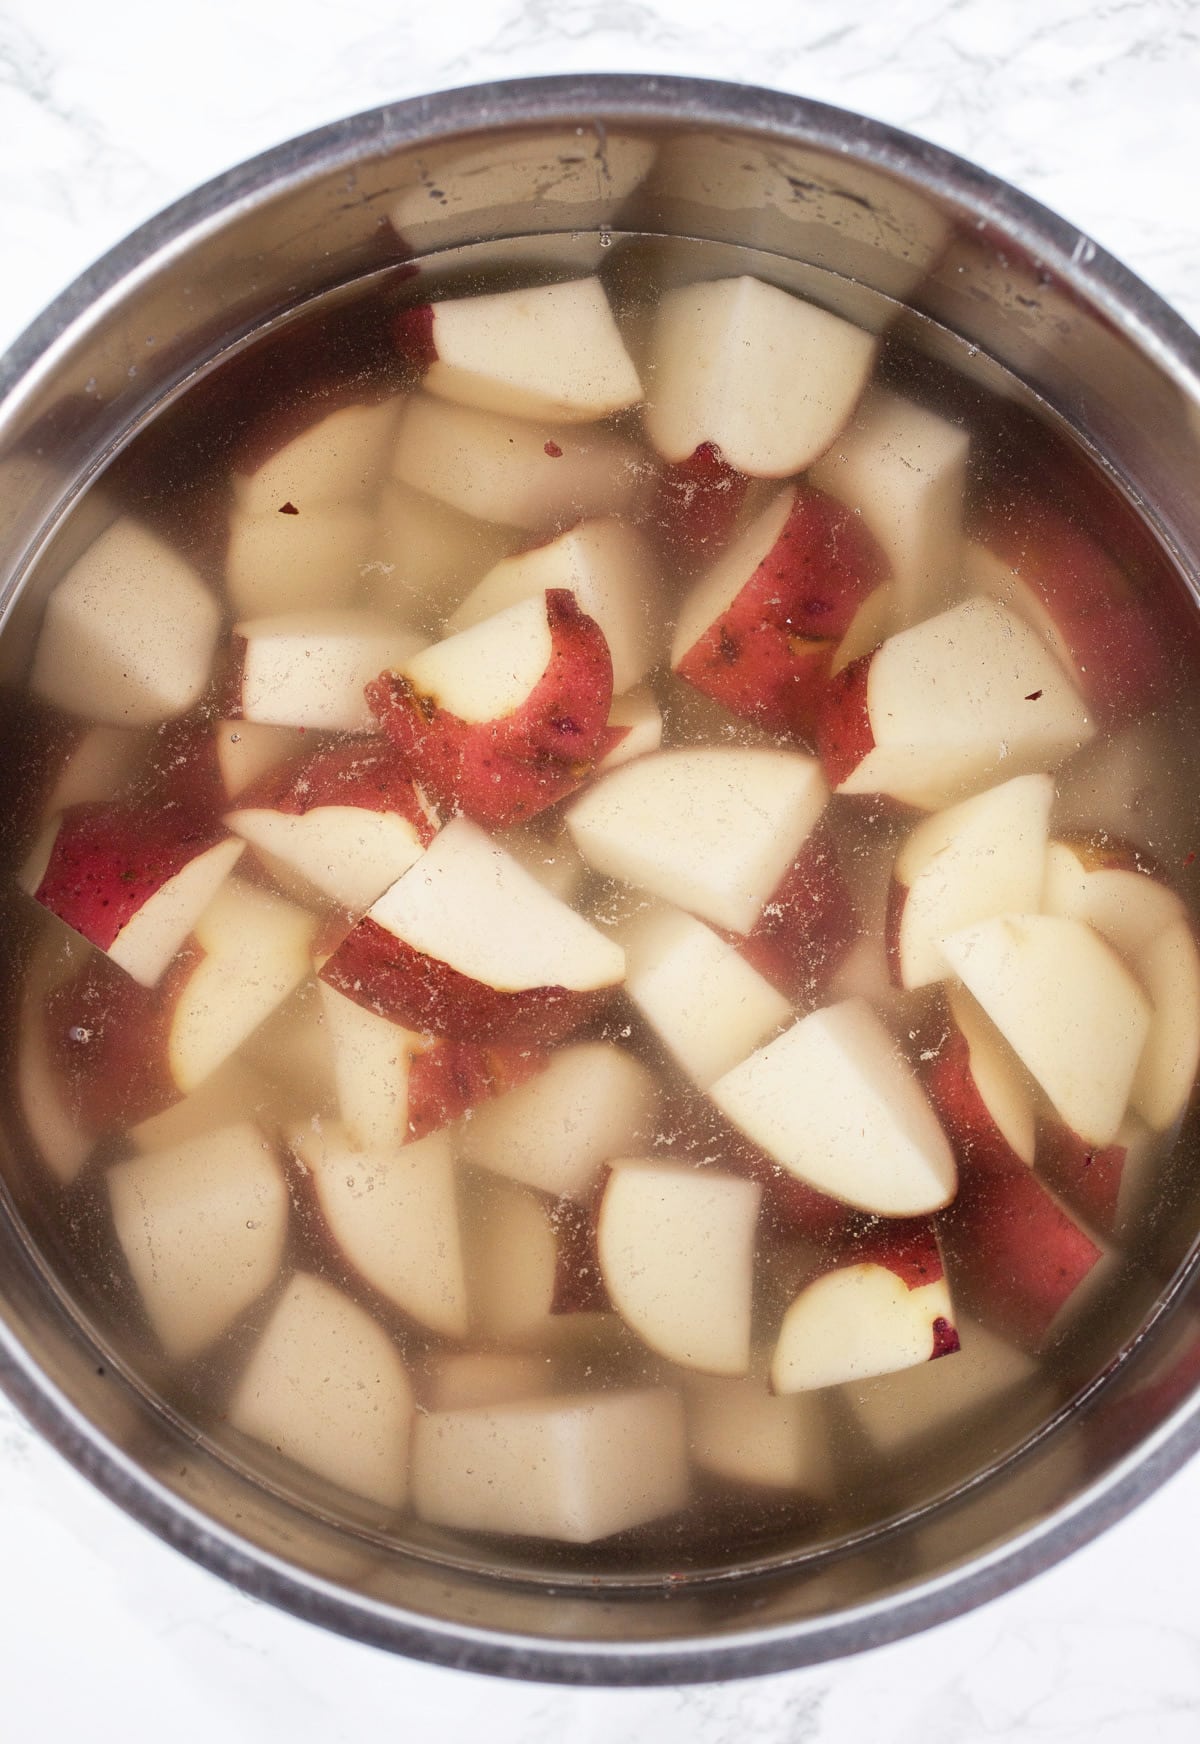 Uncooked diced red potatoes in pot of water.